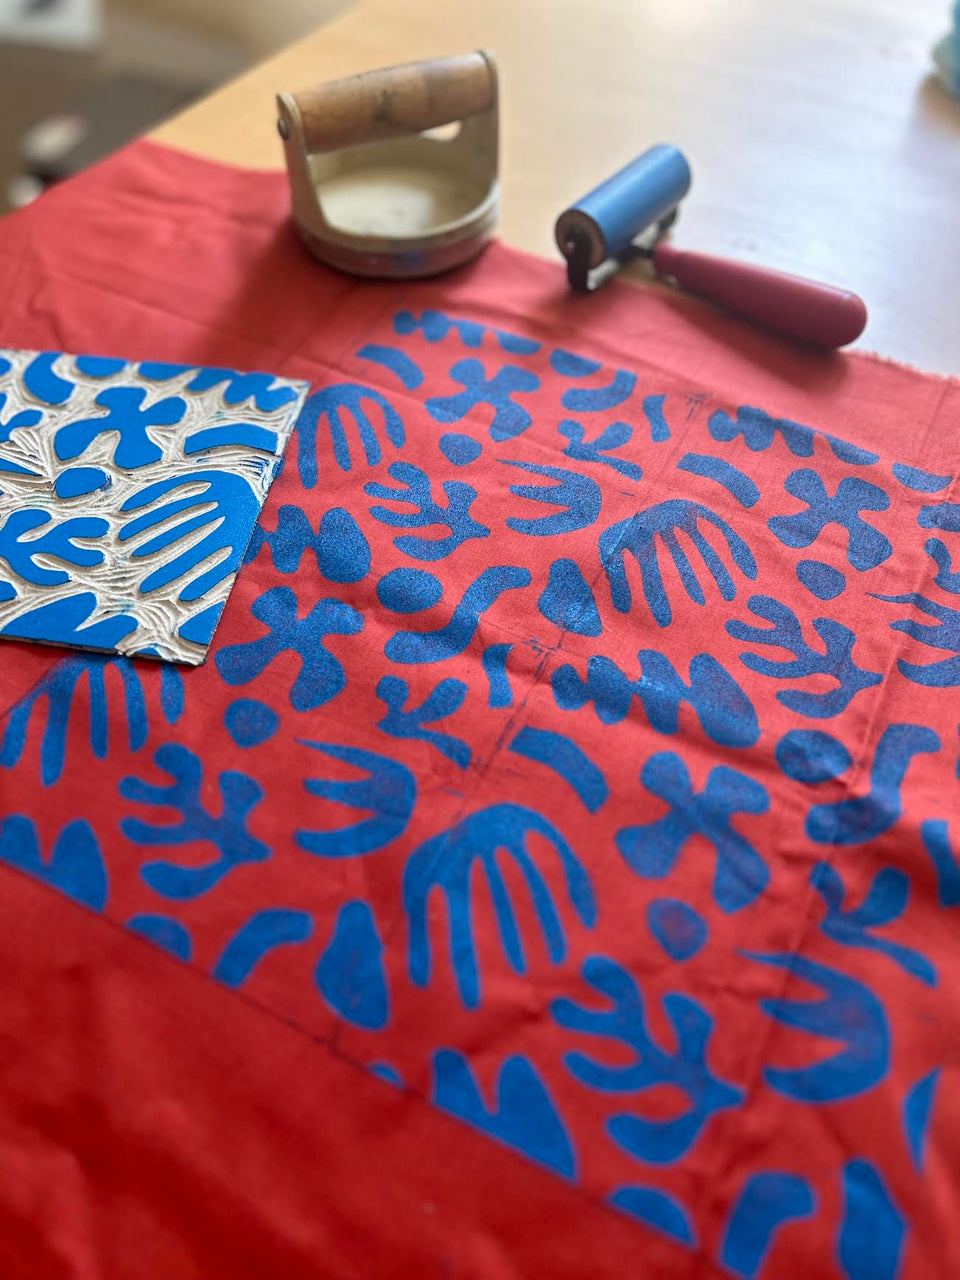 Surface Pattern Design on Textiles with Paige Dirksen